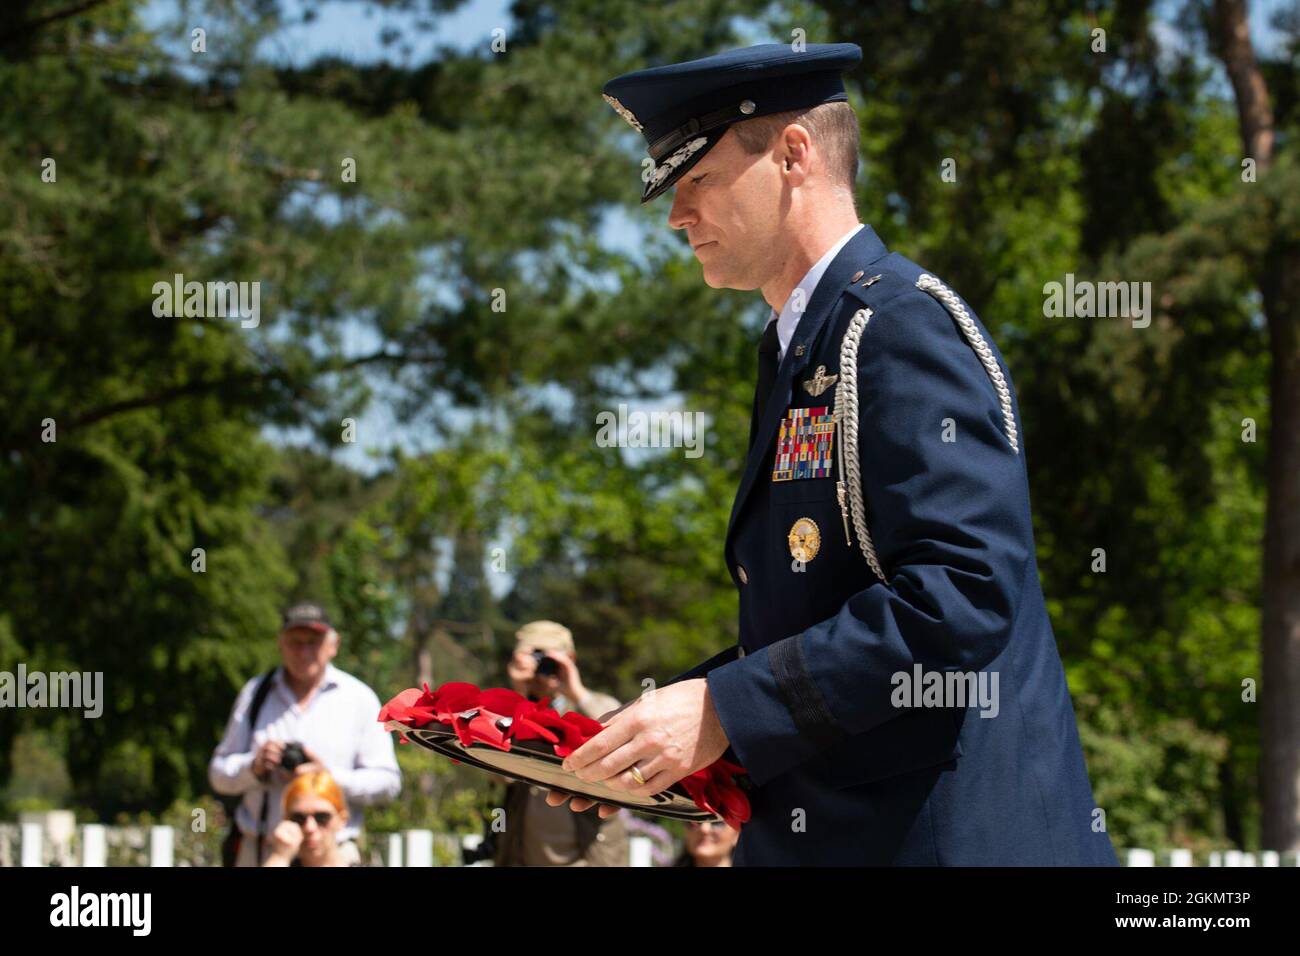 U.S. Air Force Brig. Gen. Jefferson J. O'Donnell, U.S. European Command senior defense official and defense attaché, lays a memorial wreath at a 2021 Memorial Day ceremony at the Brookwood American Military Cemetery, England, May 30, 2021. Memorial Day is one of our Nation's most solemn occasions. It serves as a chance to pause, reflect, and honor the women and men who gave the last full measure defending our Nation and our democratic ideals. Stock Photo